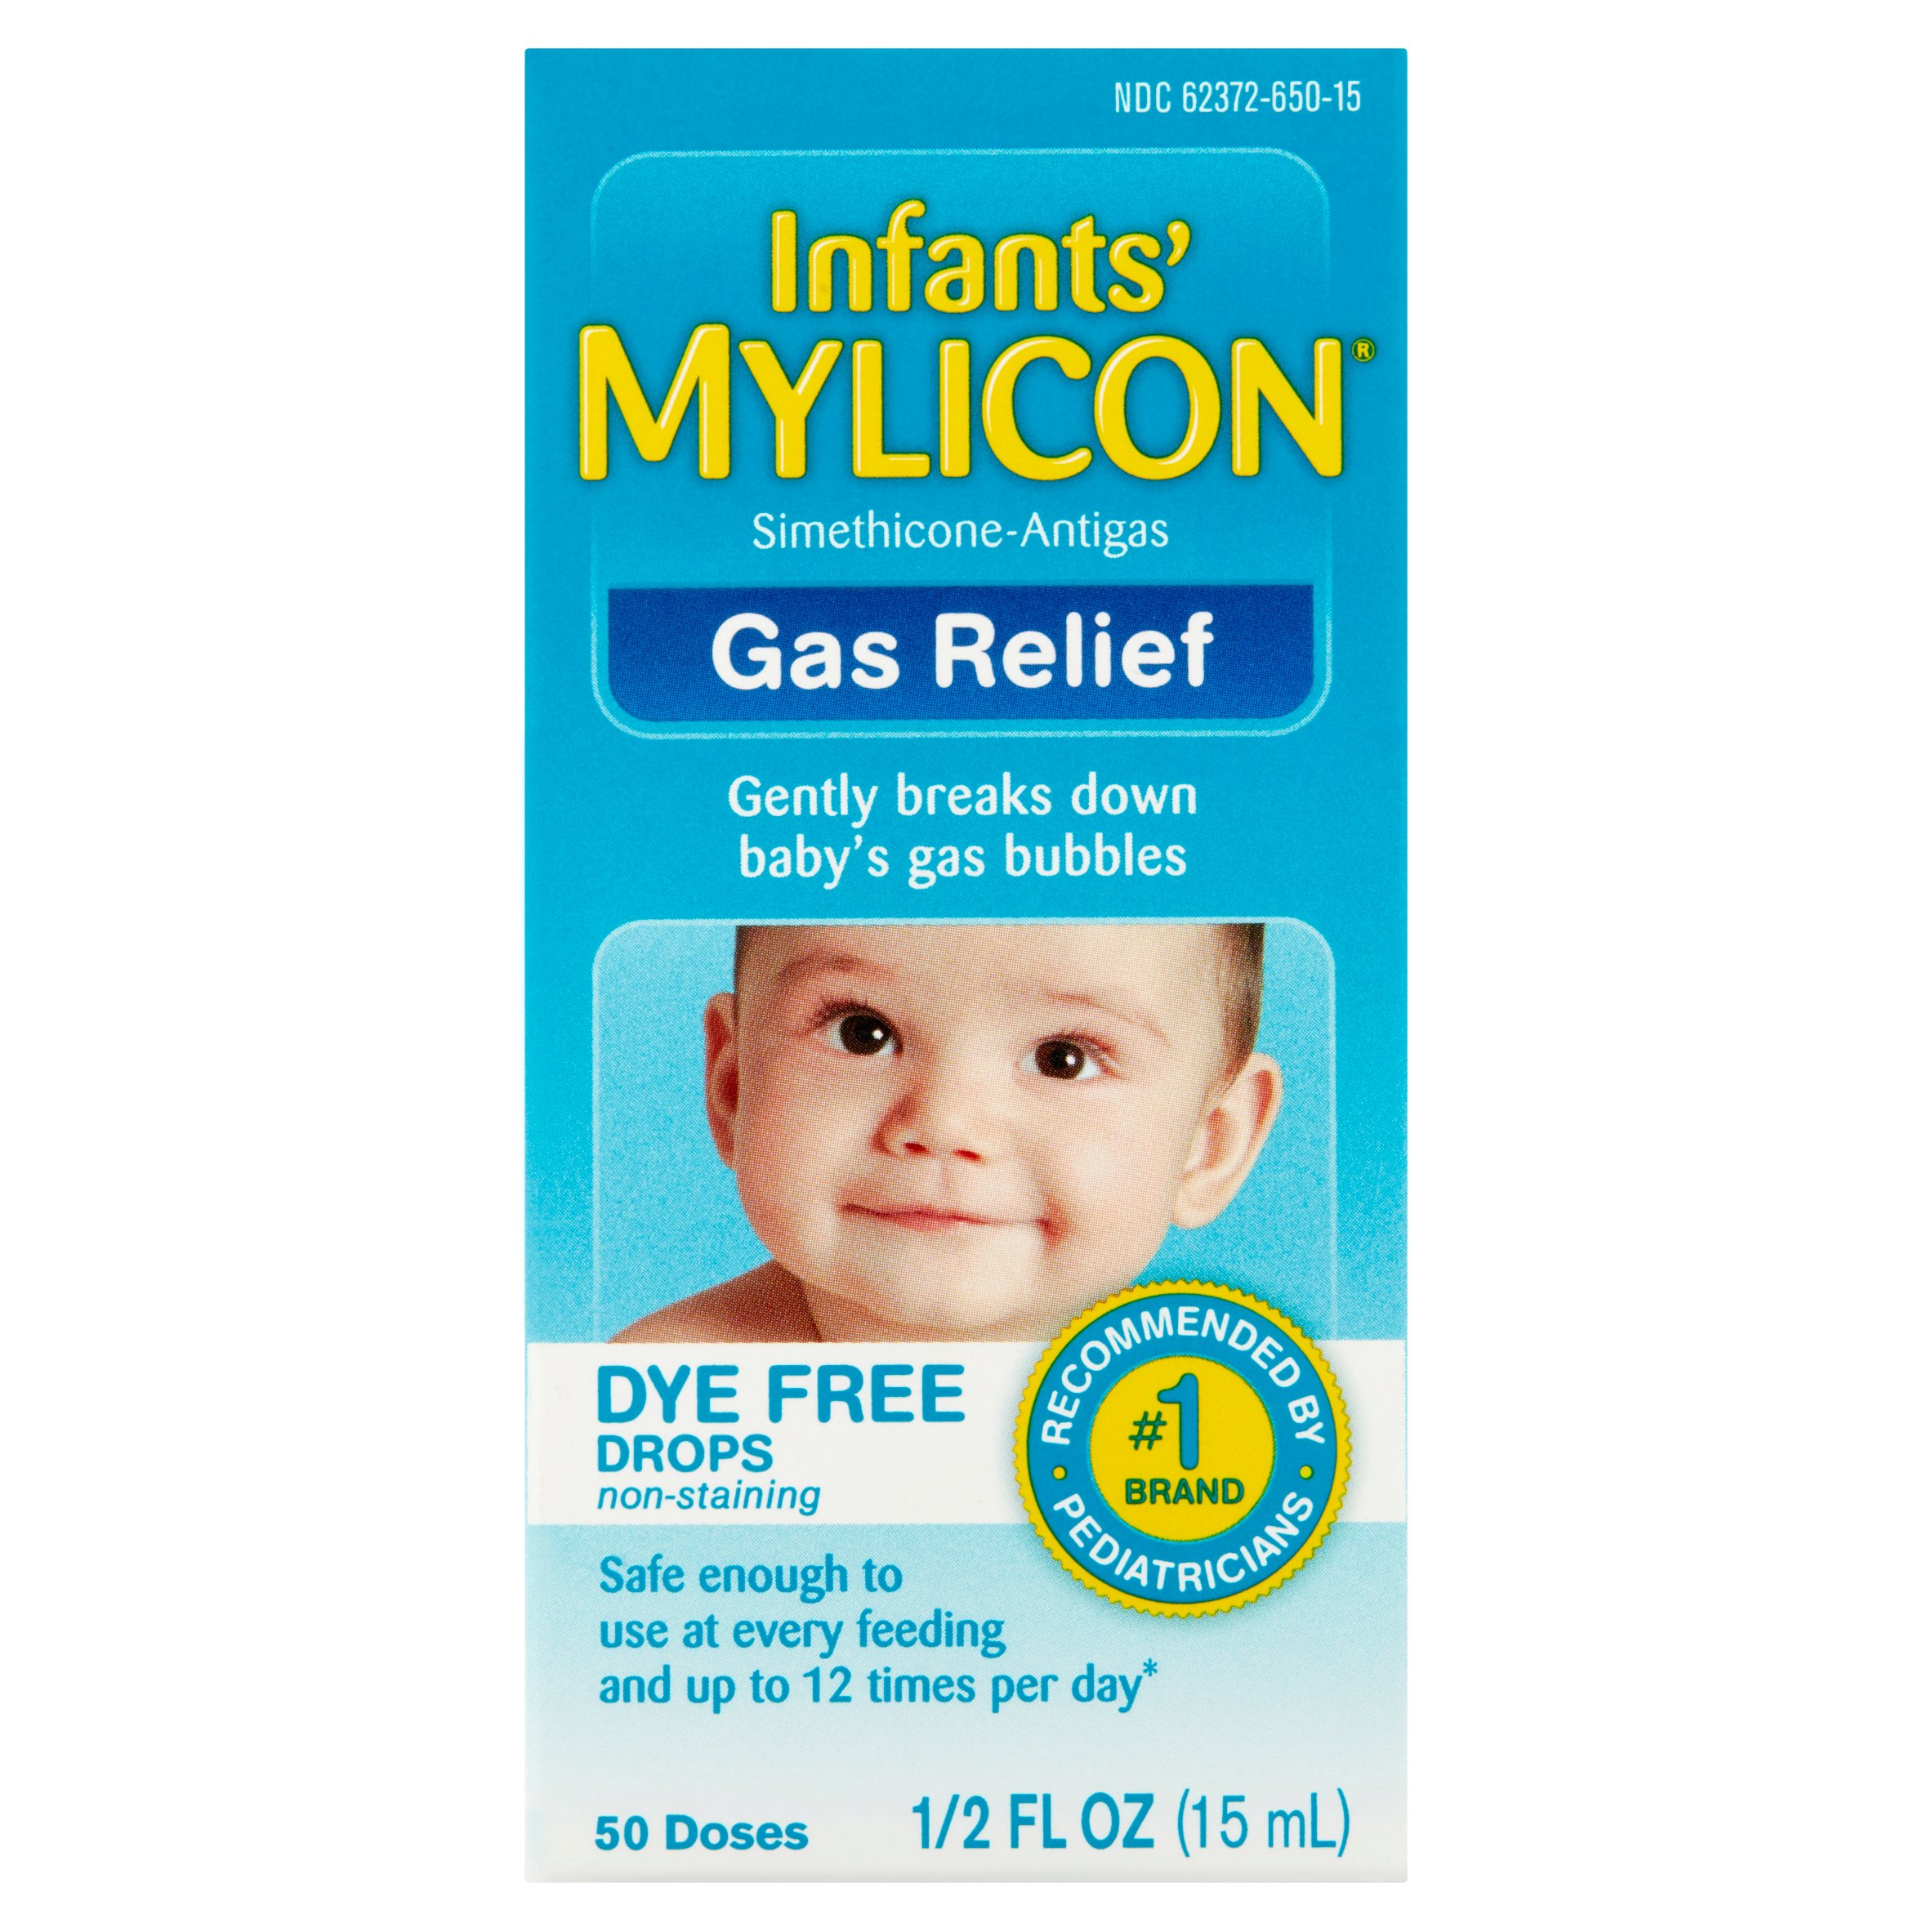 Mylicon Infant Gas Relief Dye Free Drops 0.50 oz - image 1 of 4